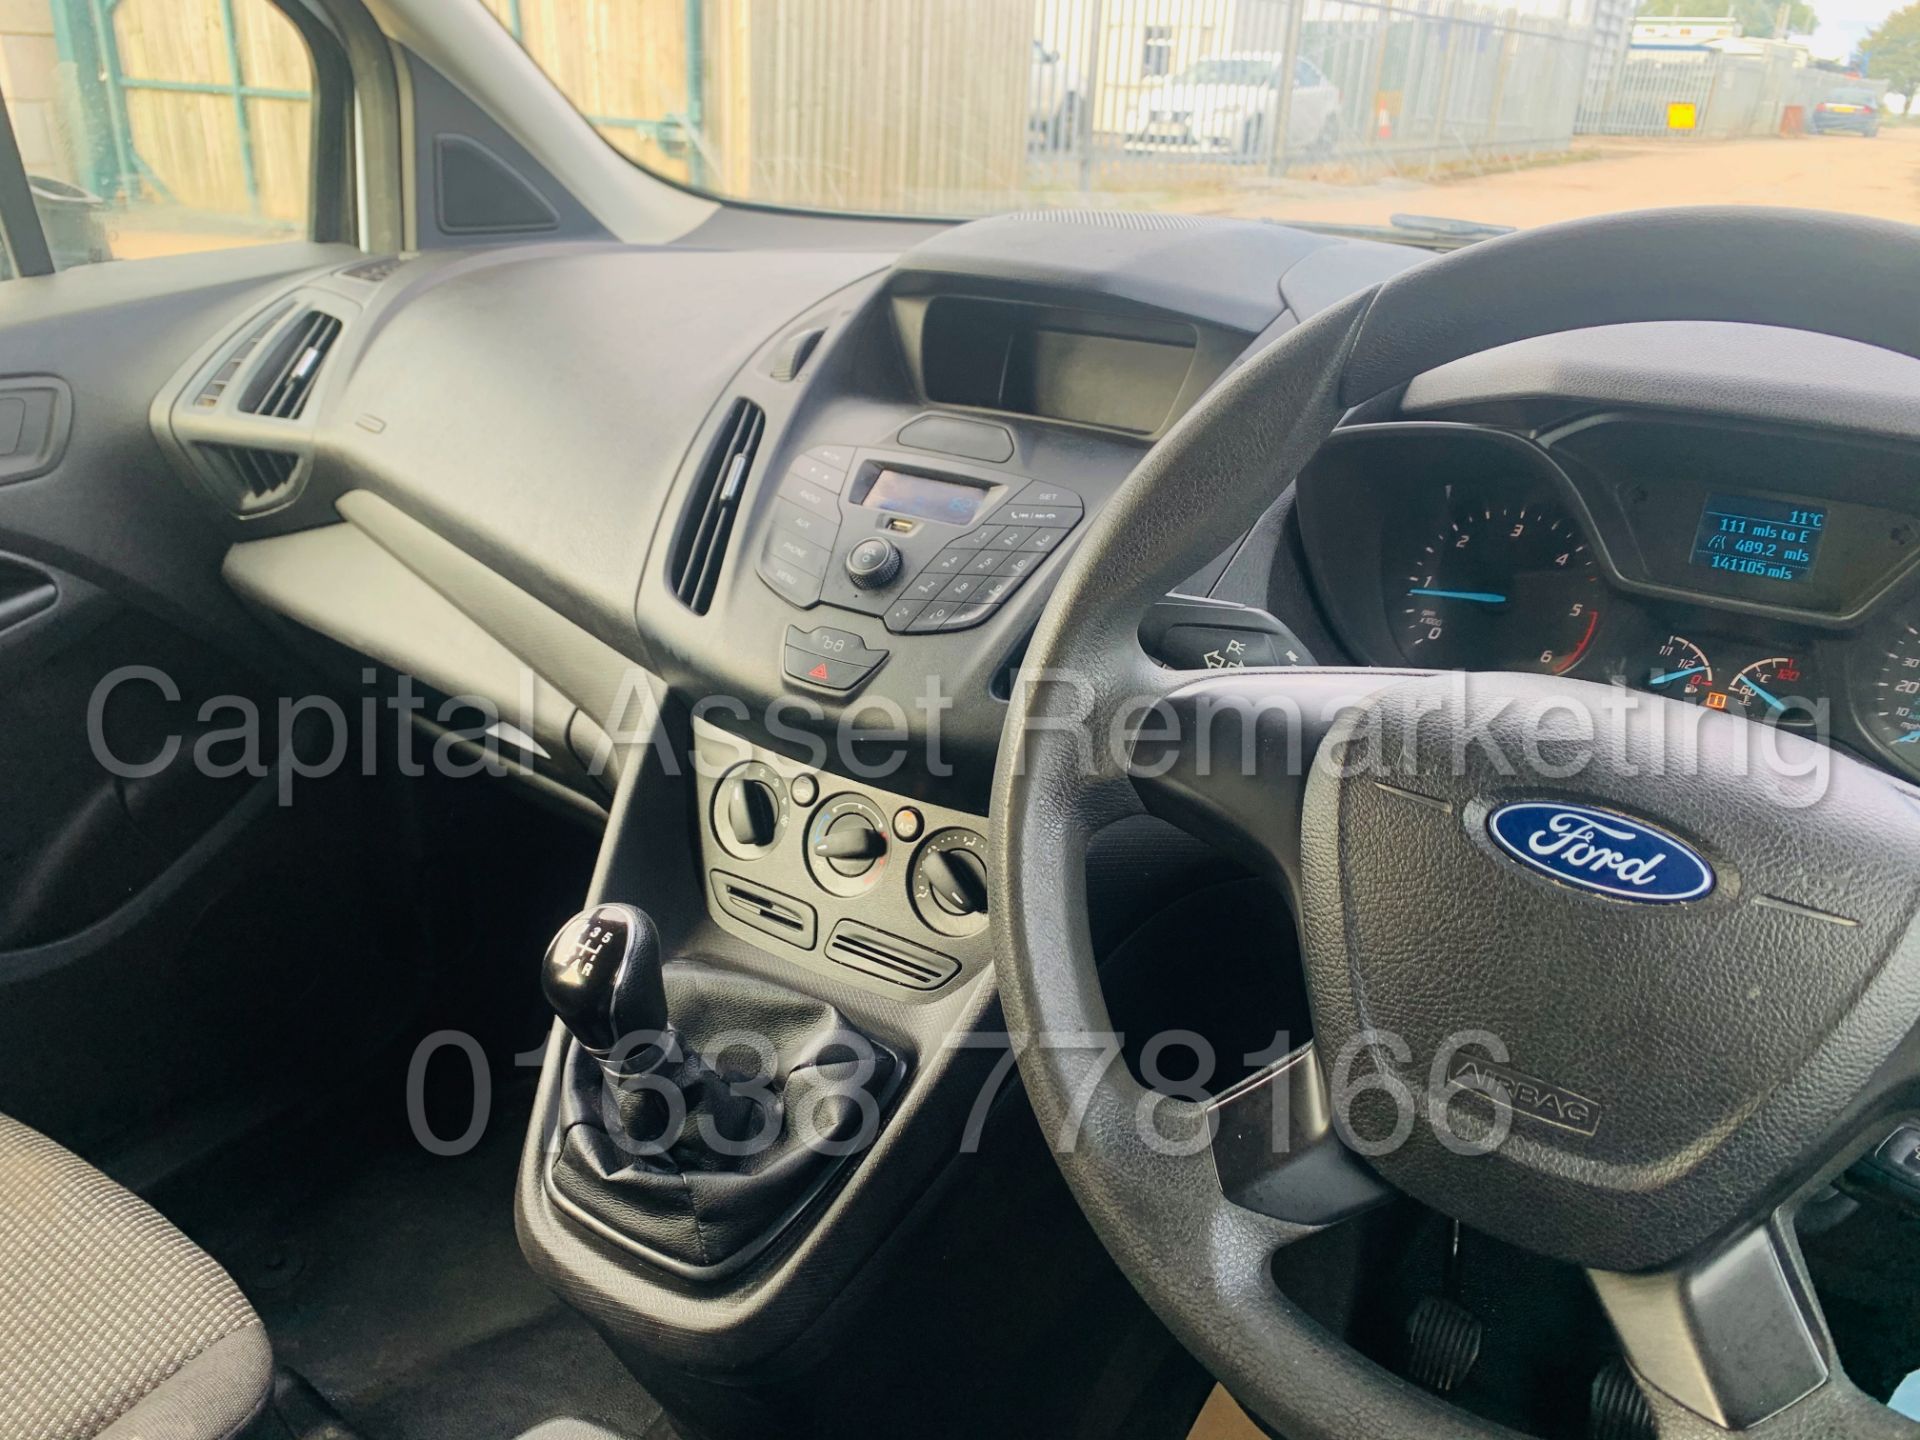 (ON SALE) FORD TRANSIT CONNECT *LWB- 5 SEATER CREW VAN* (2018 - EURO 6) 1.5 TDCI *AIR CON* (1 OWNER) - Image 32 of 40